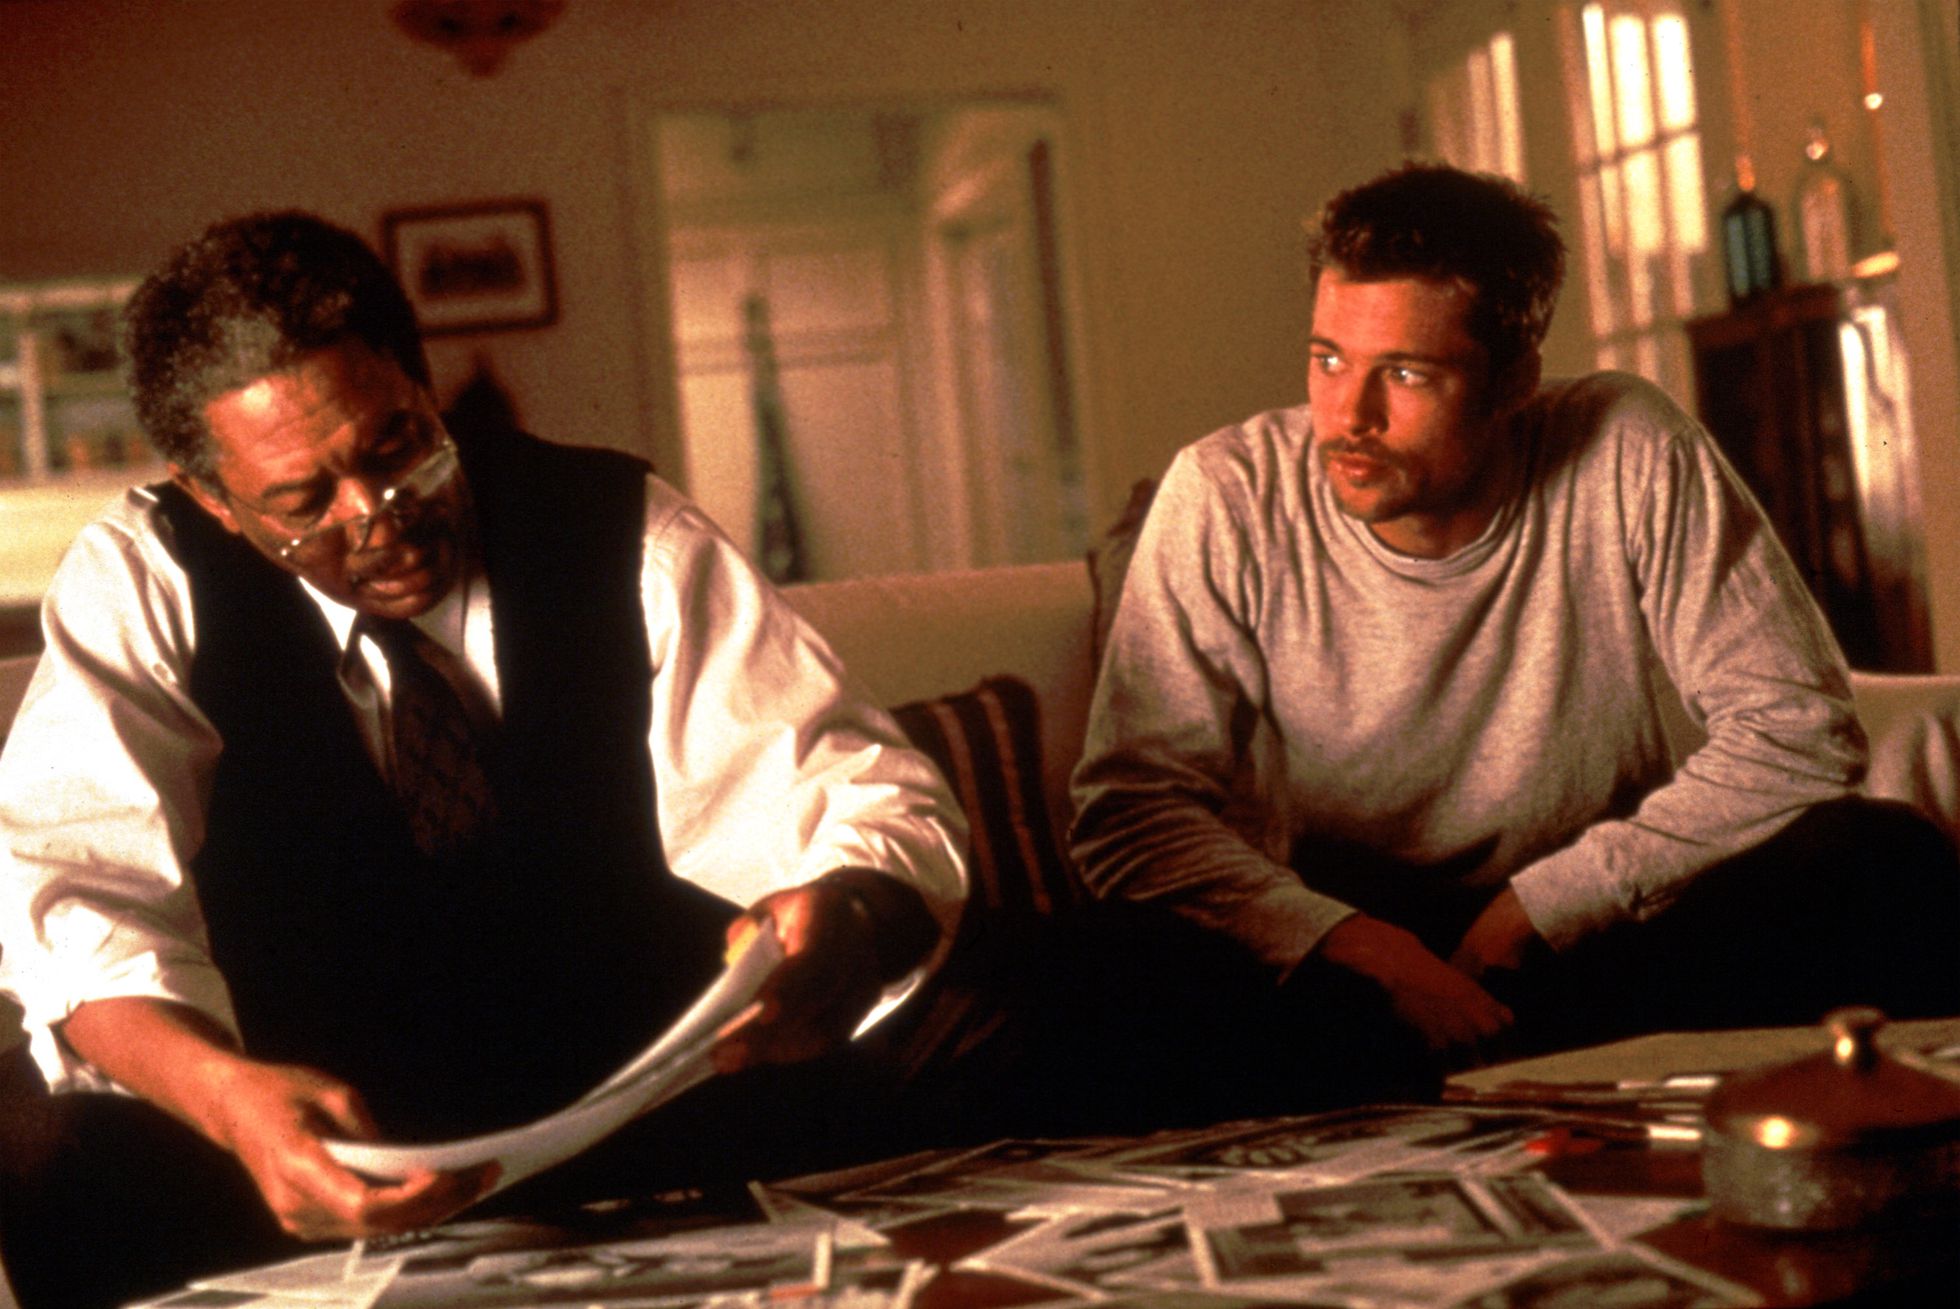 Morgan Freeman and Brad Pitt in a scene from 'Seven.' GETTY IMAGES (GETTY IMAGES)